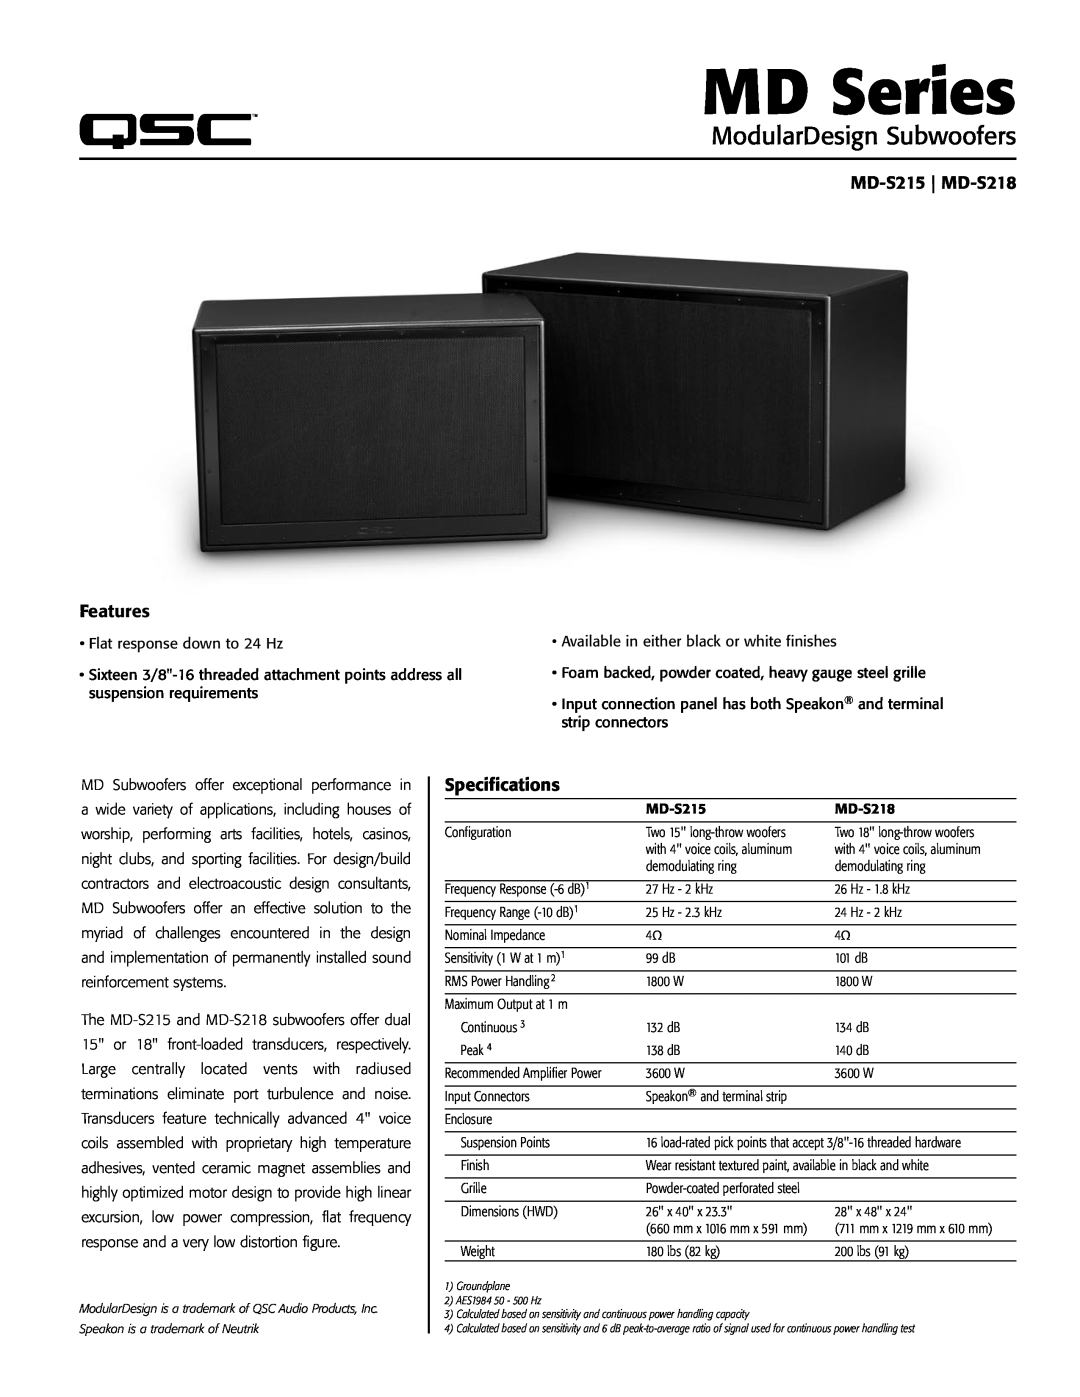 QSC Audio specifications MD-S215 MD-S218, Features, Specifications, MD Series, ModularDesign Subwoofers 